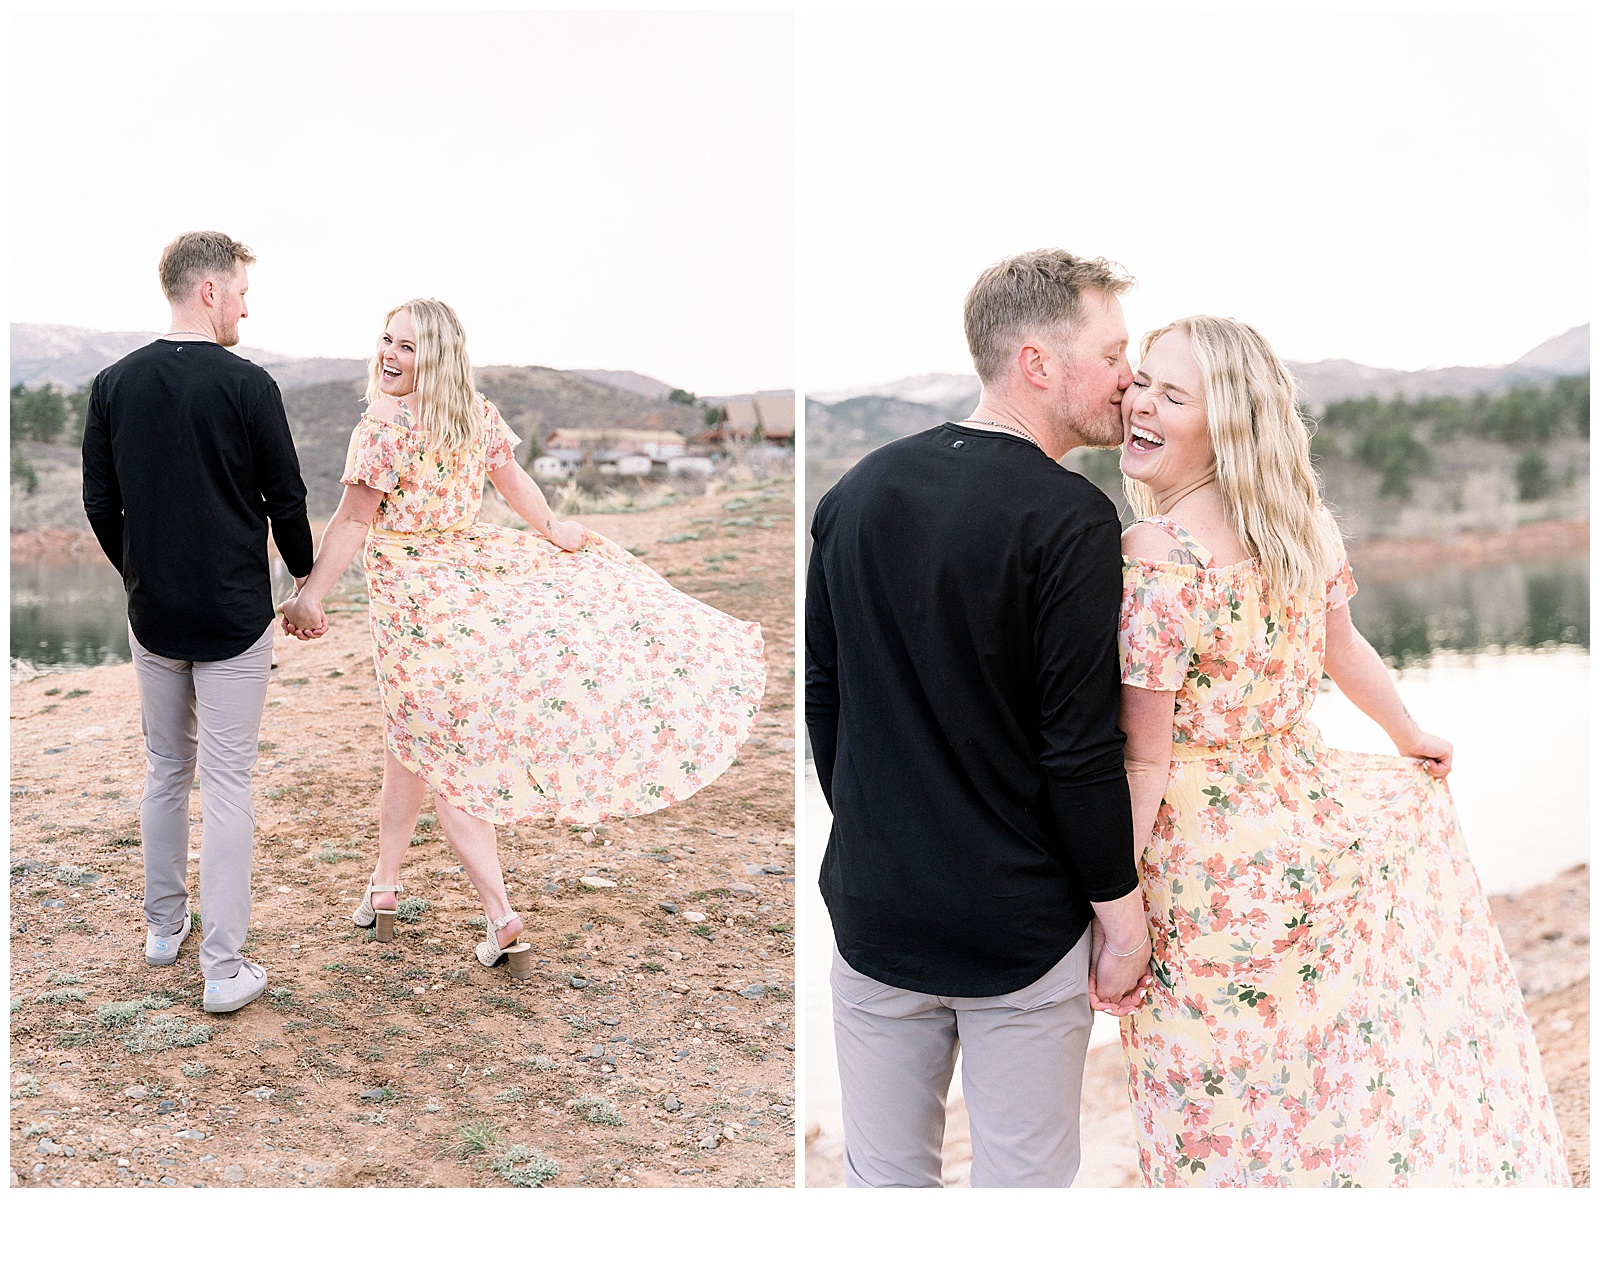 flowy dress at engagement session